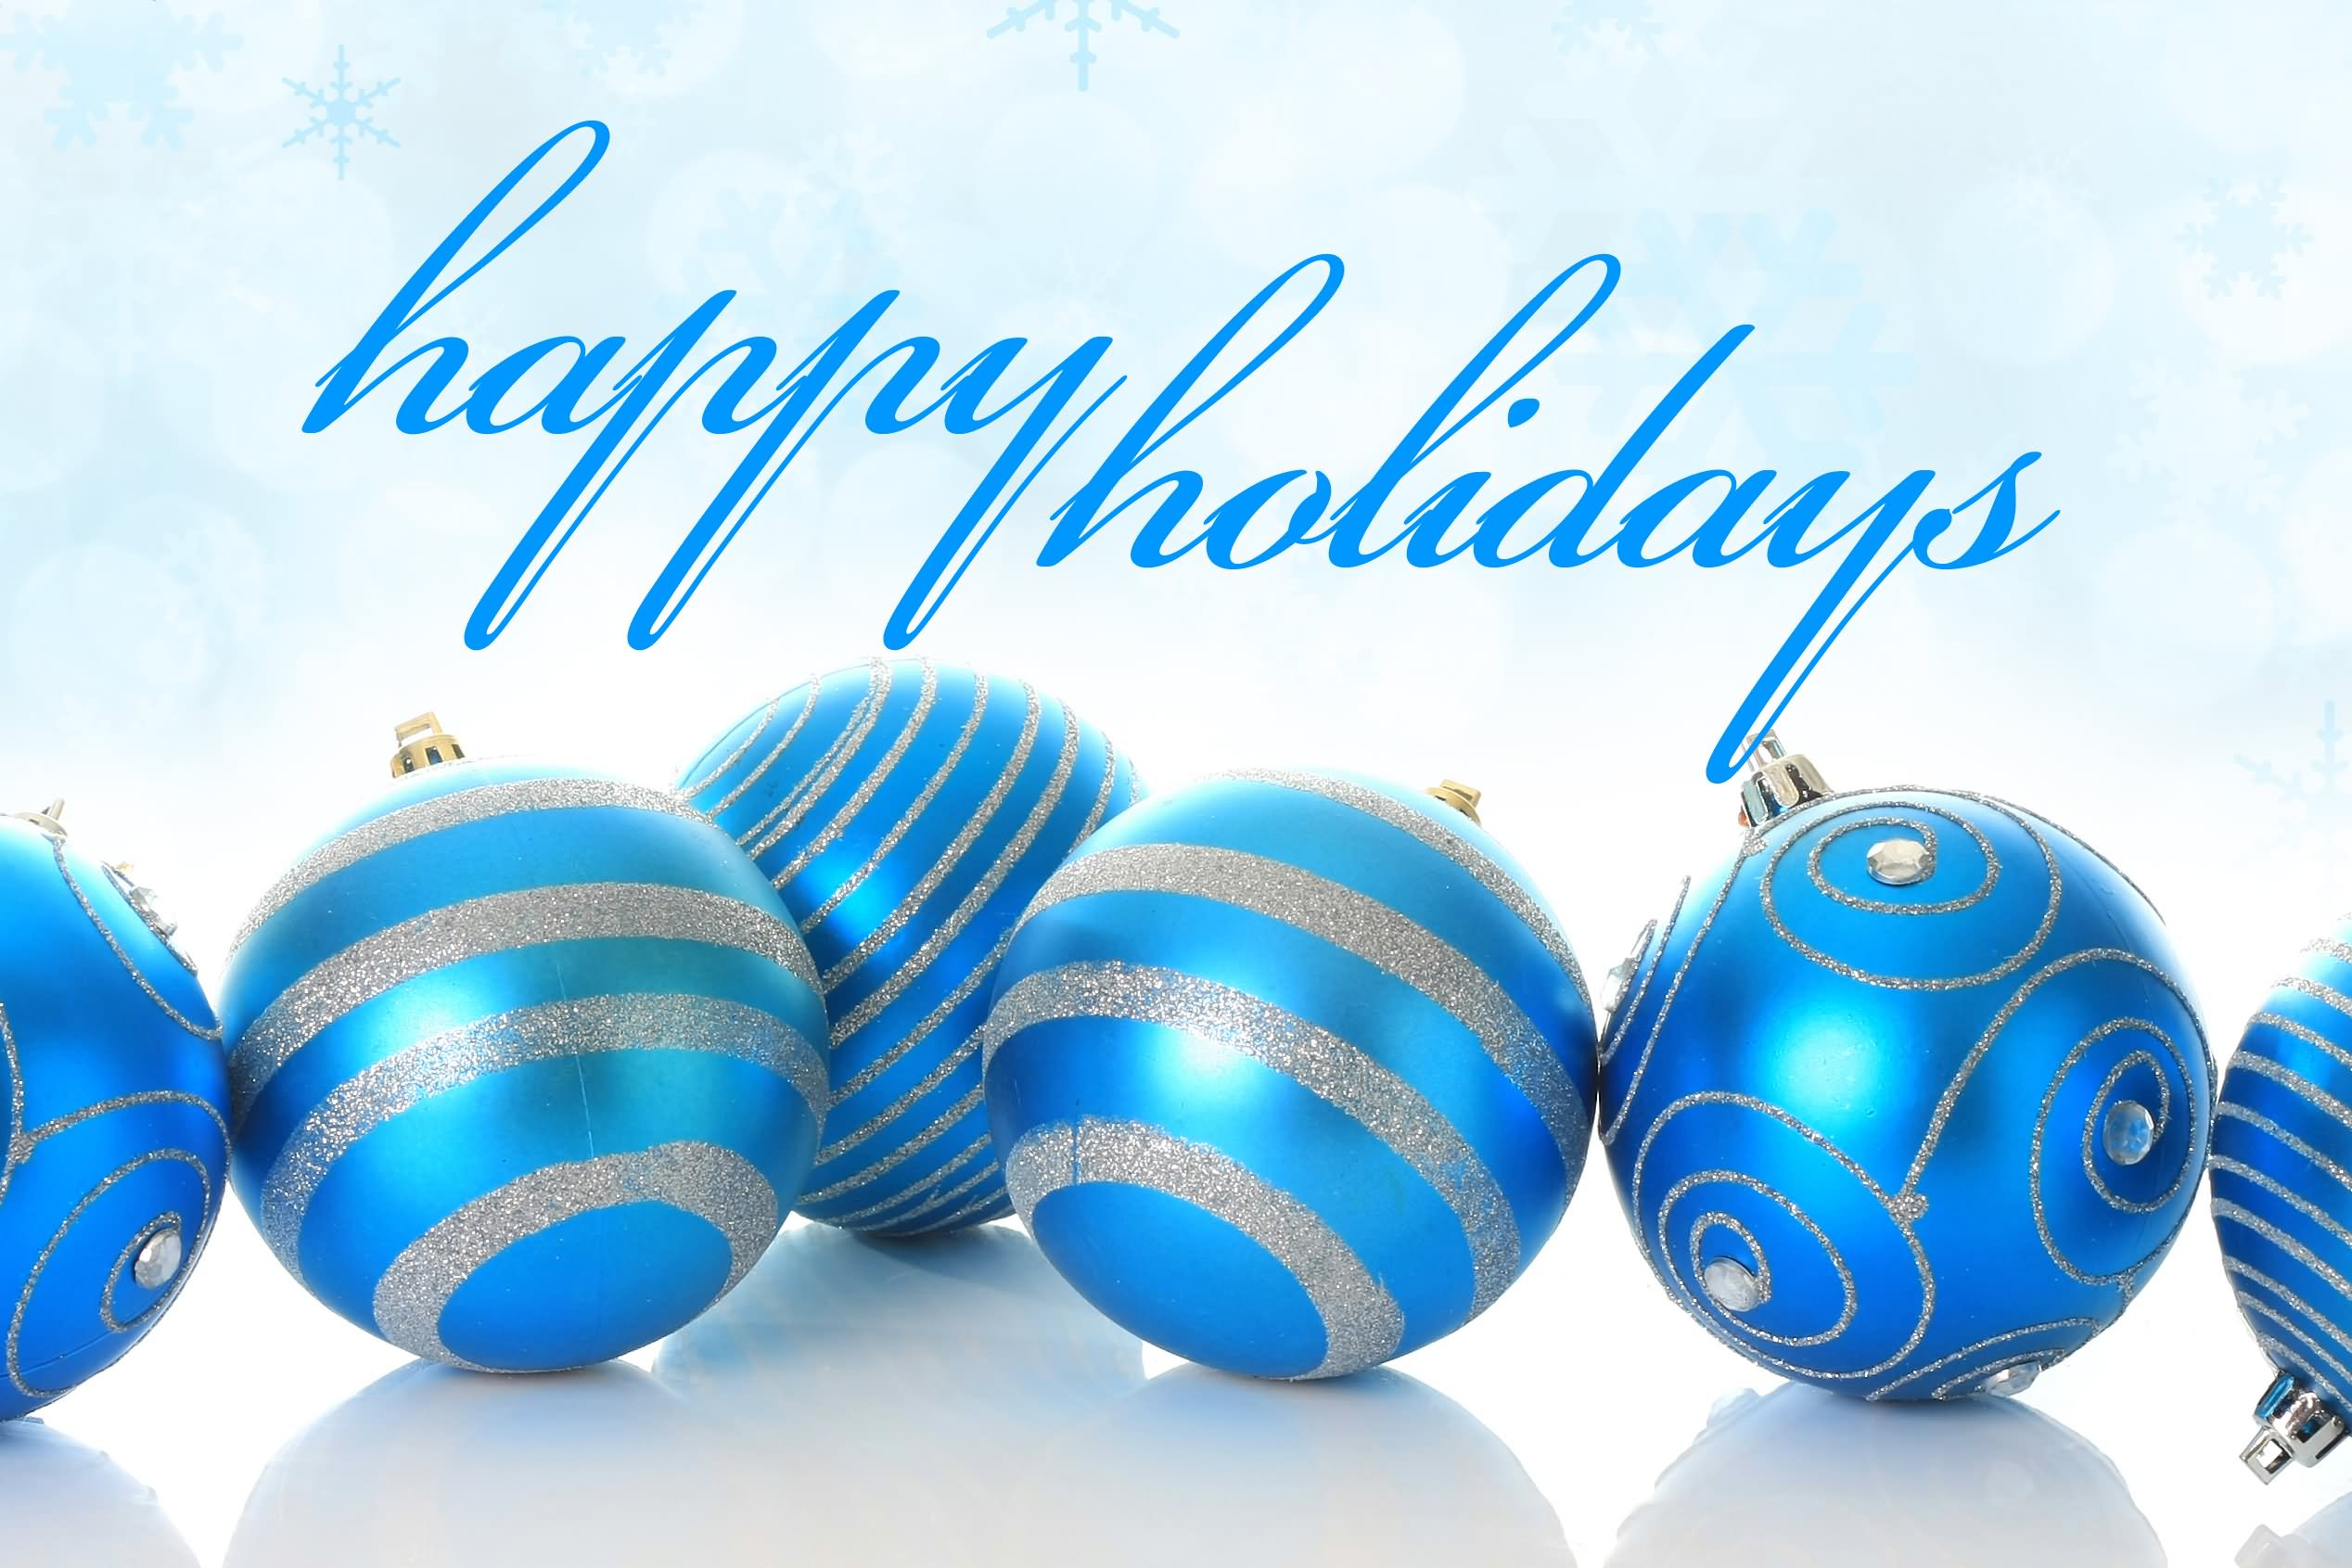 Beautiful ornaments in different shades of blue adorn this message for happy holidays.